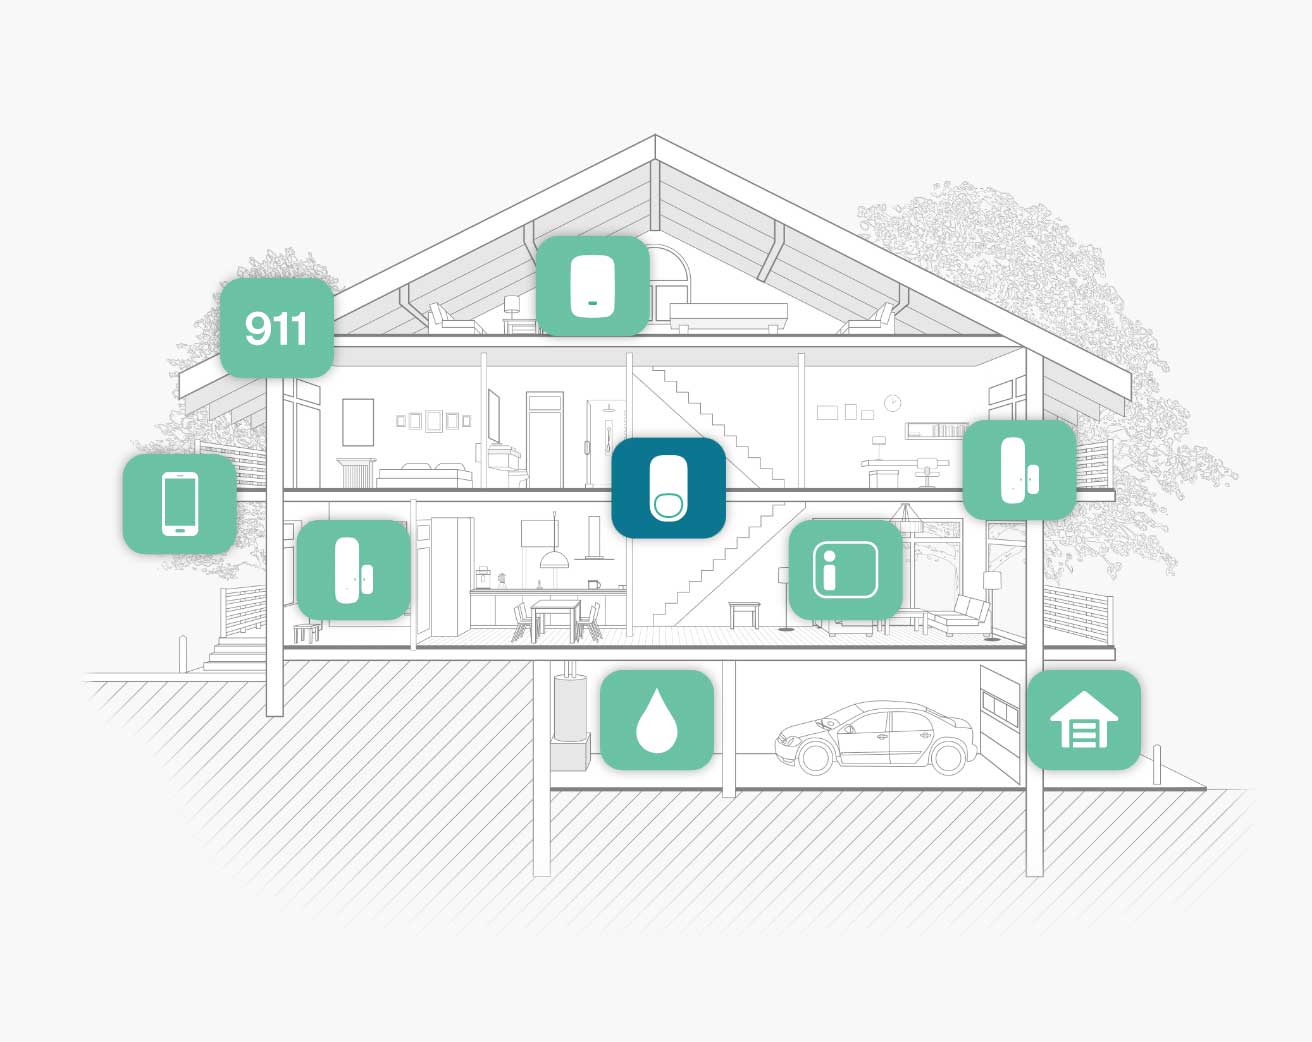 Motion detector icon in house diagram.